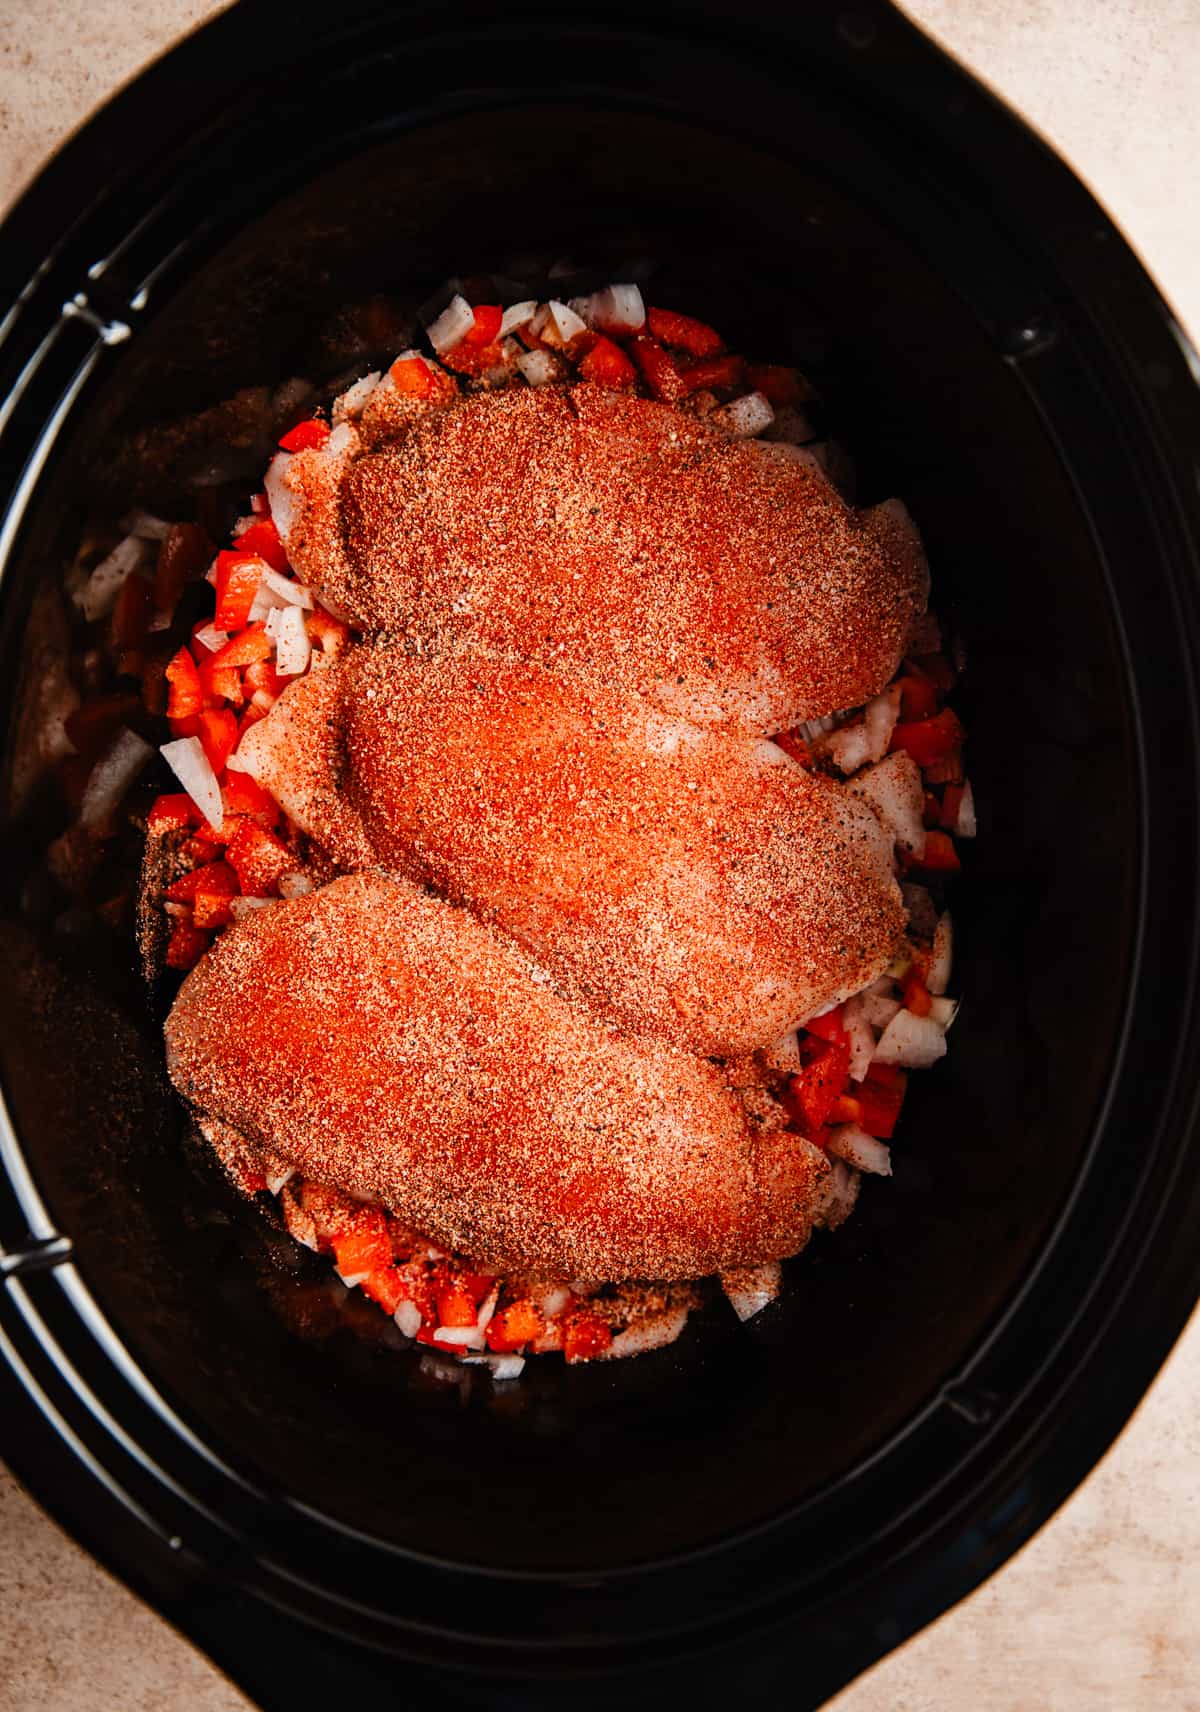 Chicken breasts with spice rub on onions and peppers in crockpot.